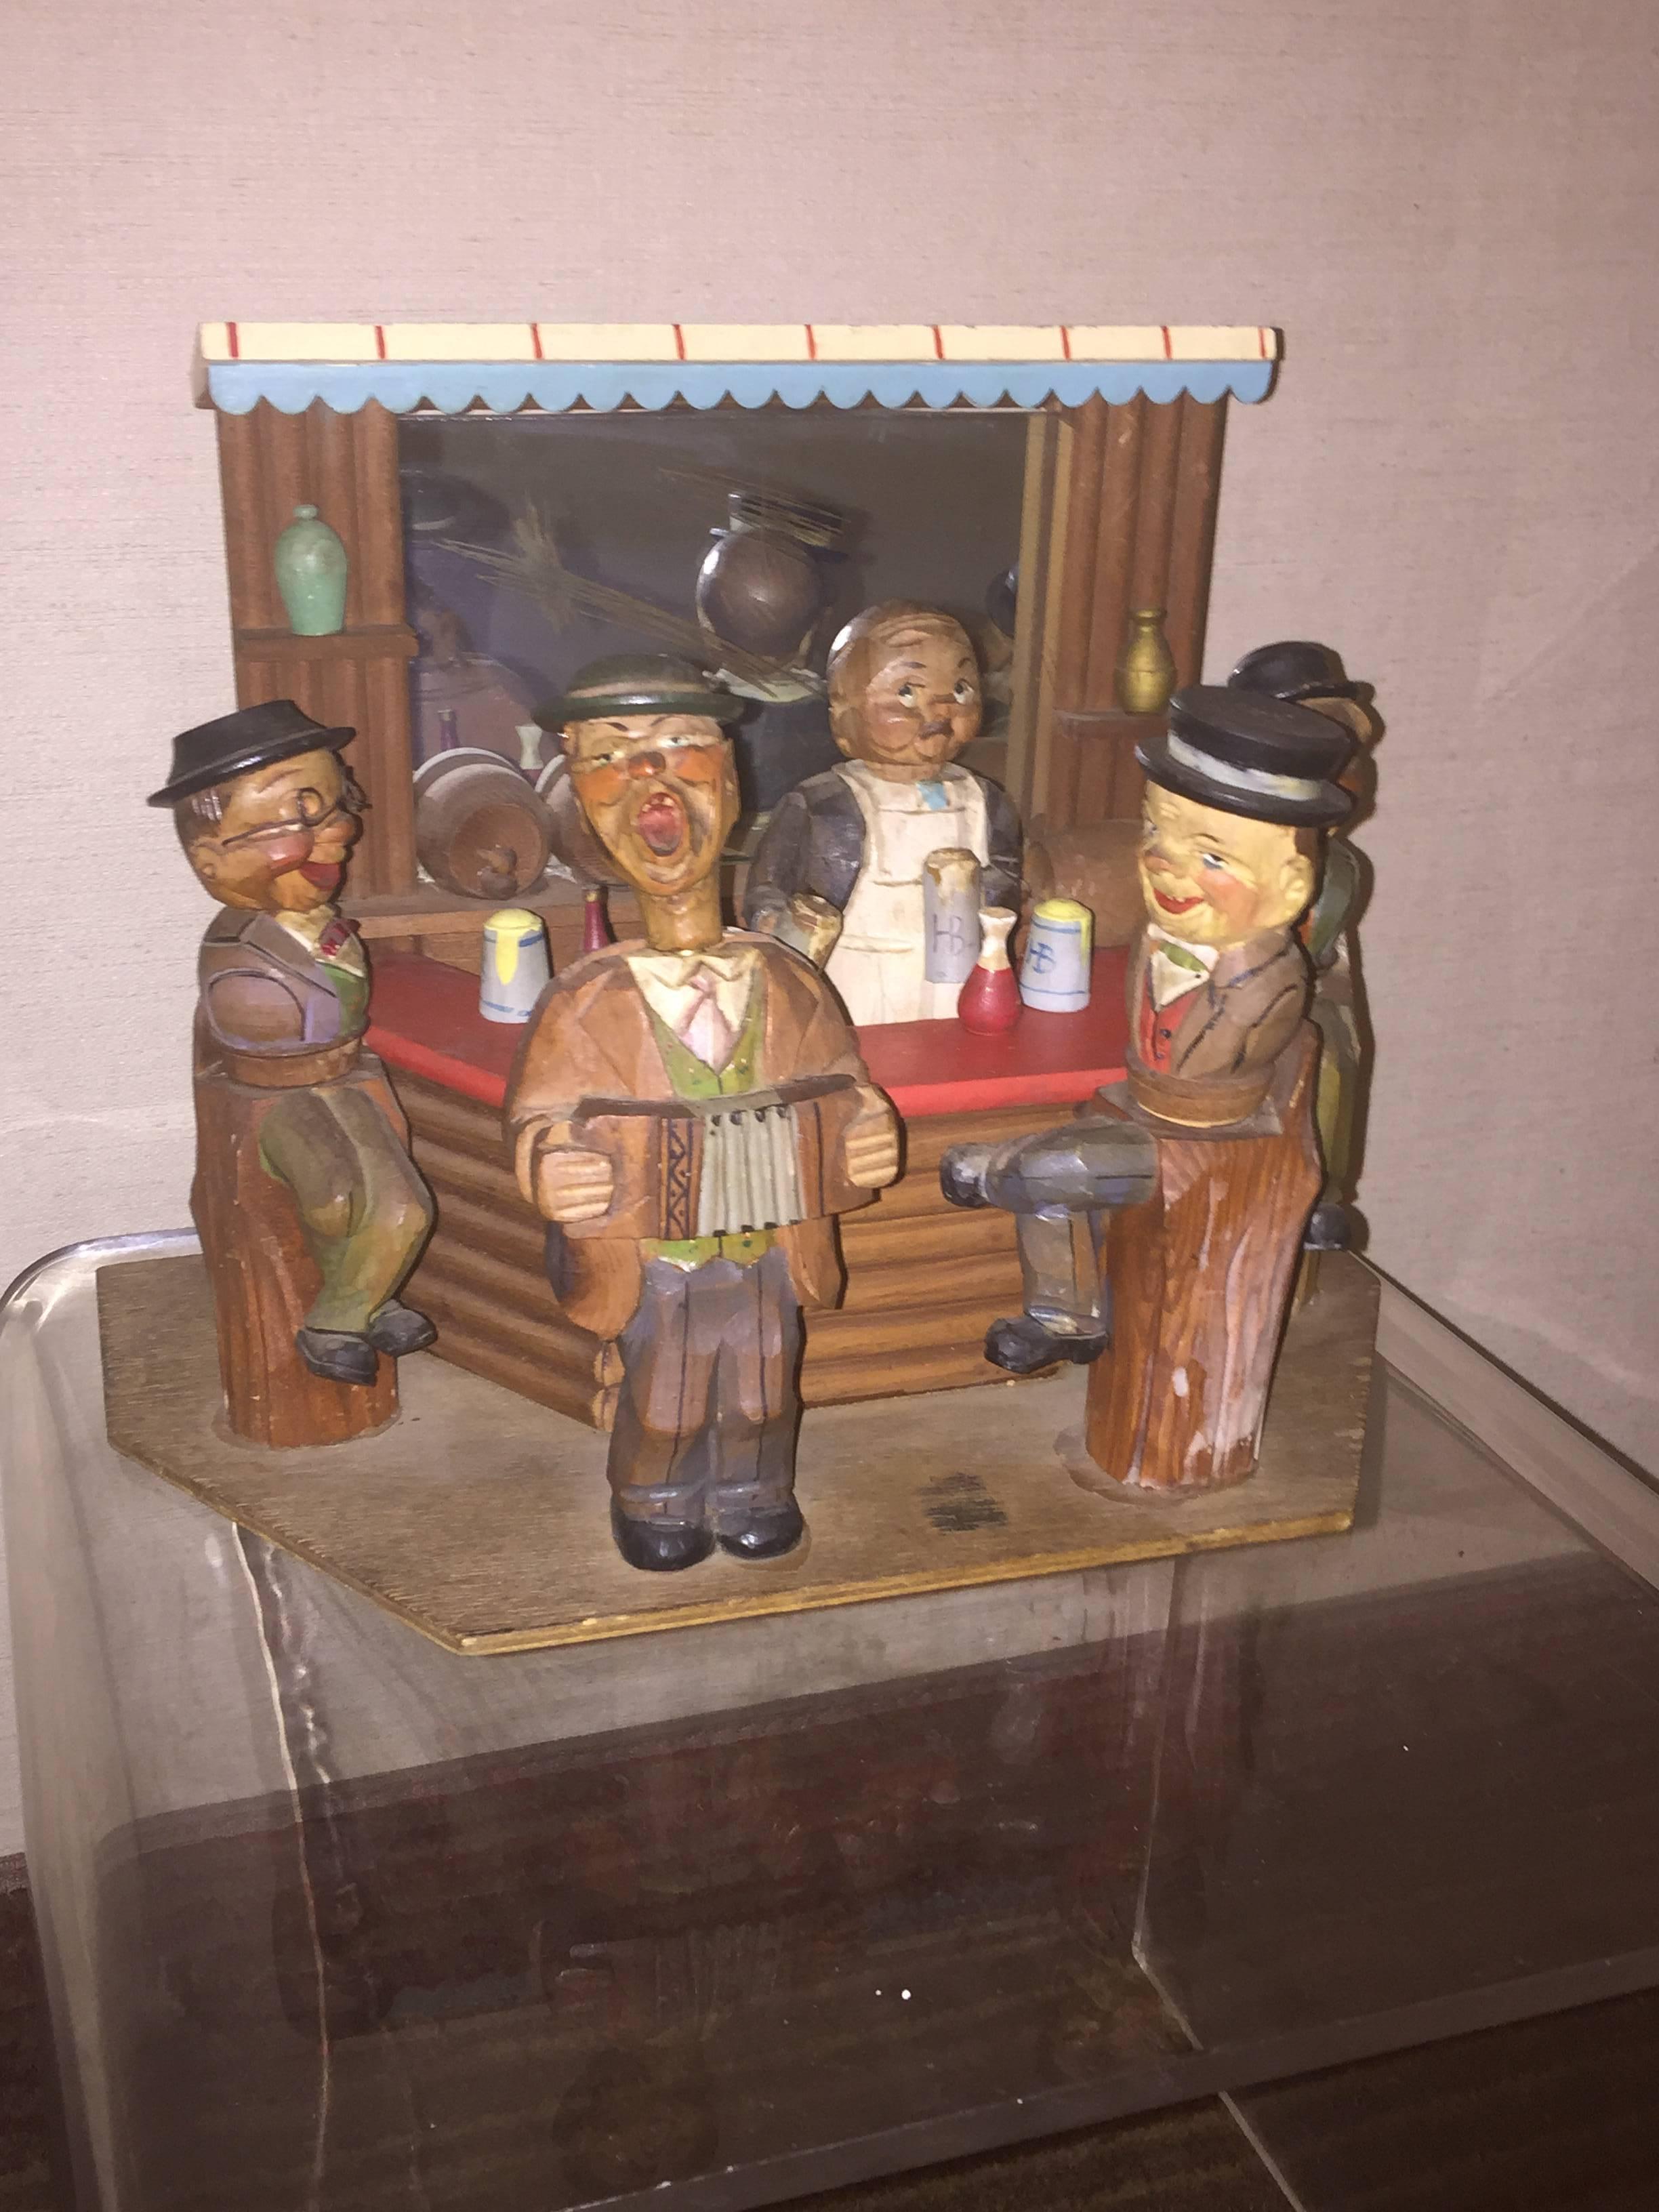 Five figure bar scene all hand-carved with interesting expressions and clothing.Designed and Hand Carved by Anri in the Italian Alps.
The Bartender is a corkscrew and the accordian player is a bottle opener. All the other seated figures are bottle